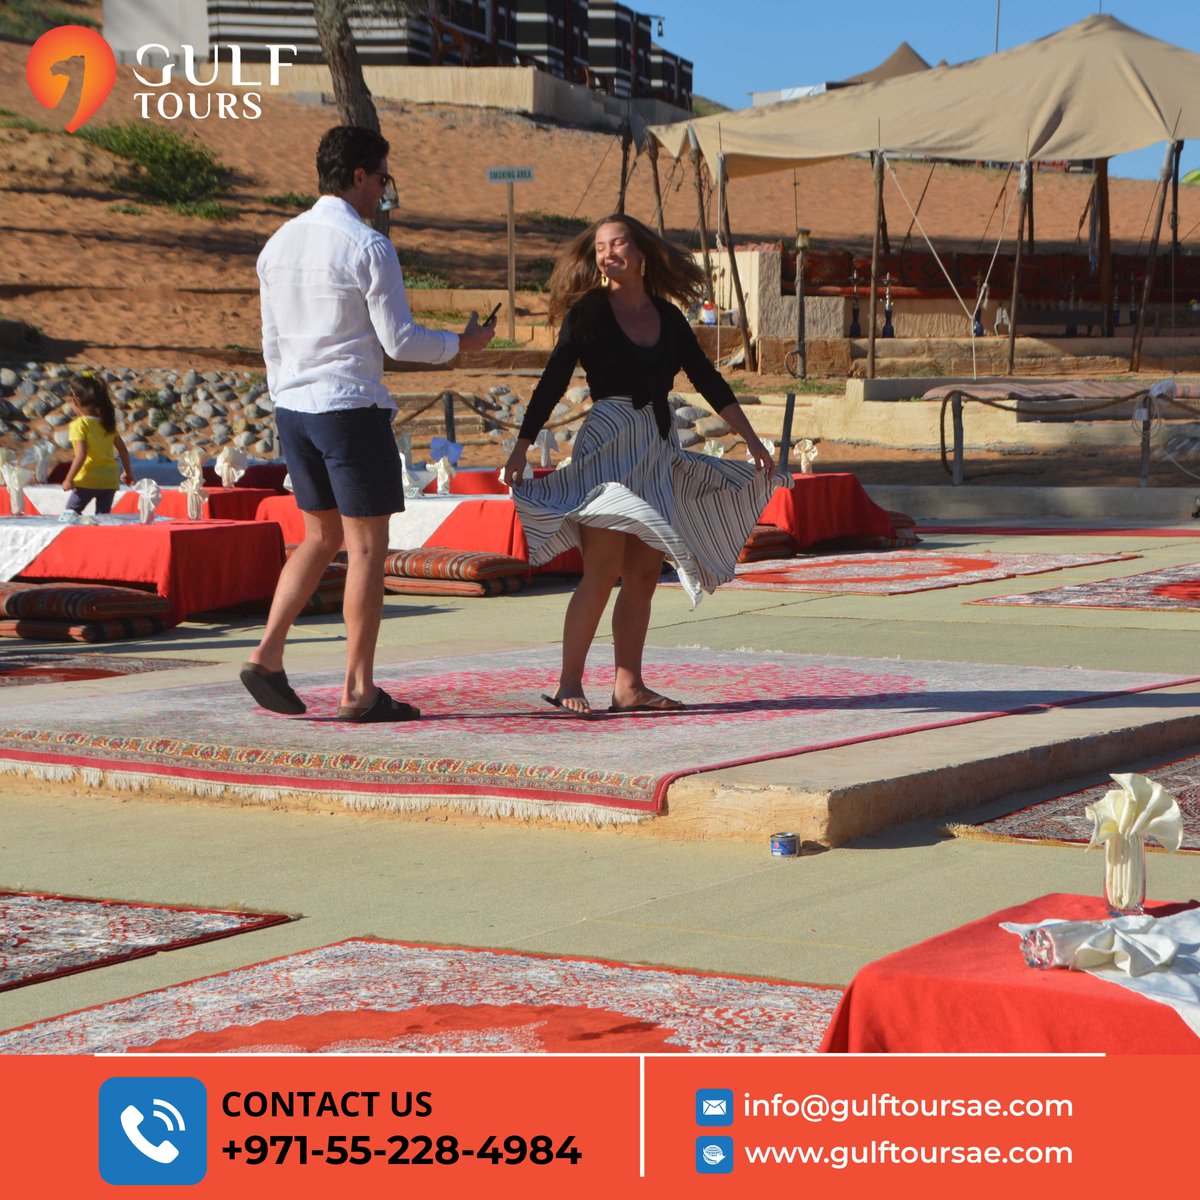 Our guests enjoy the beauty and tranquillity of the desert oasis while being surrounded by culture and comfort.
You also visit to experience the lifestyle and peace of Bedouinoasis.
visit: gulftoursae.com

 #desertcamp #camelrides #samsanddunes #duabi #uae #bedouin